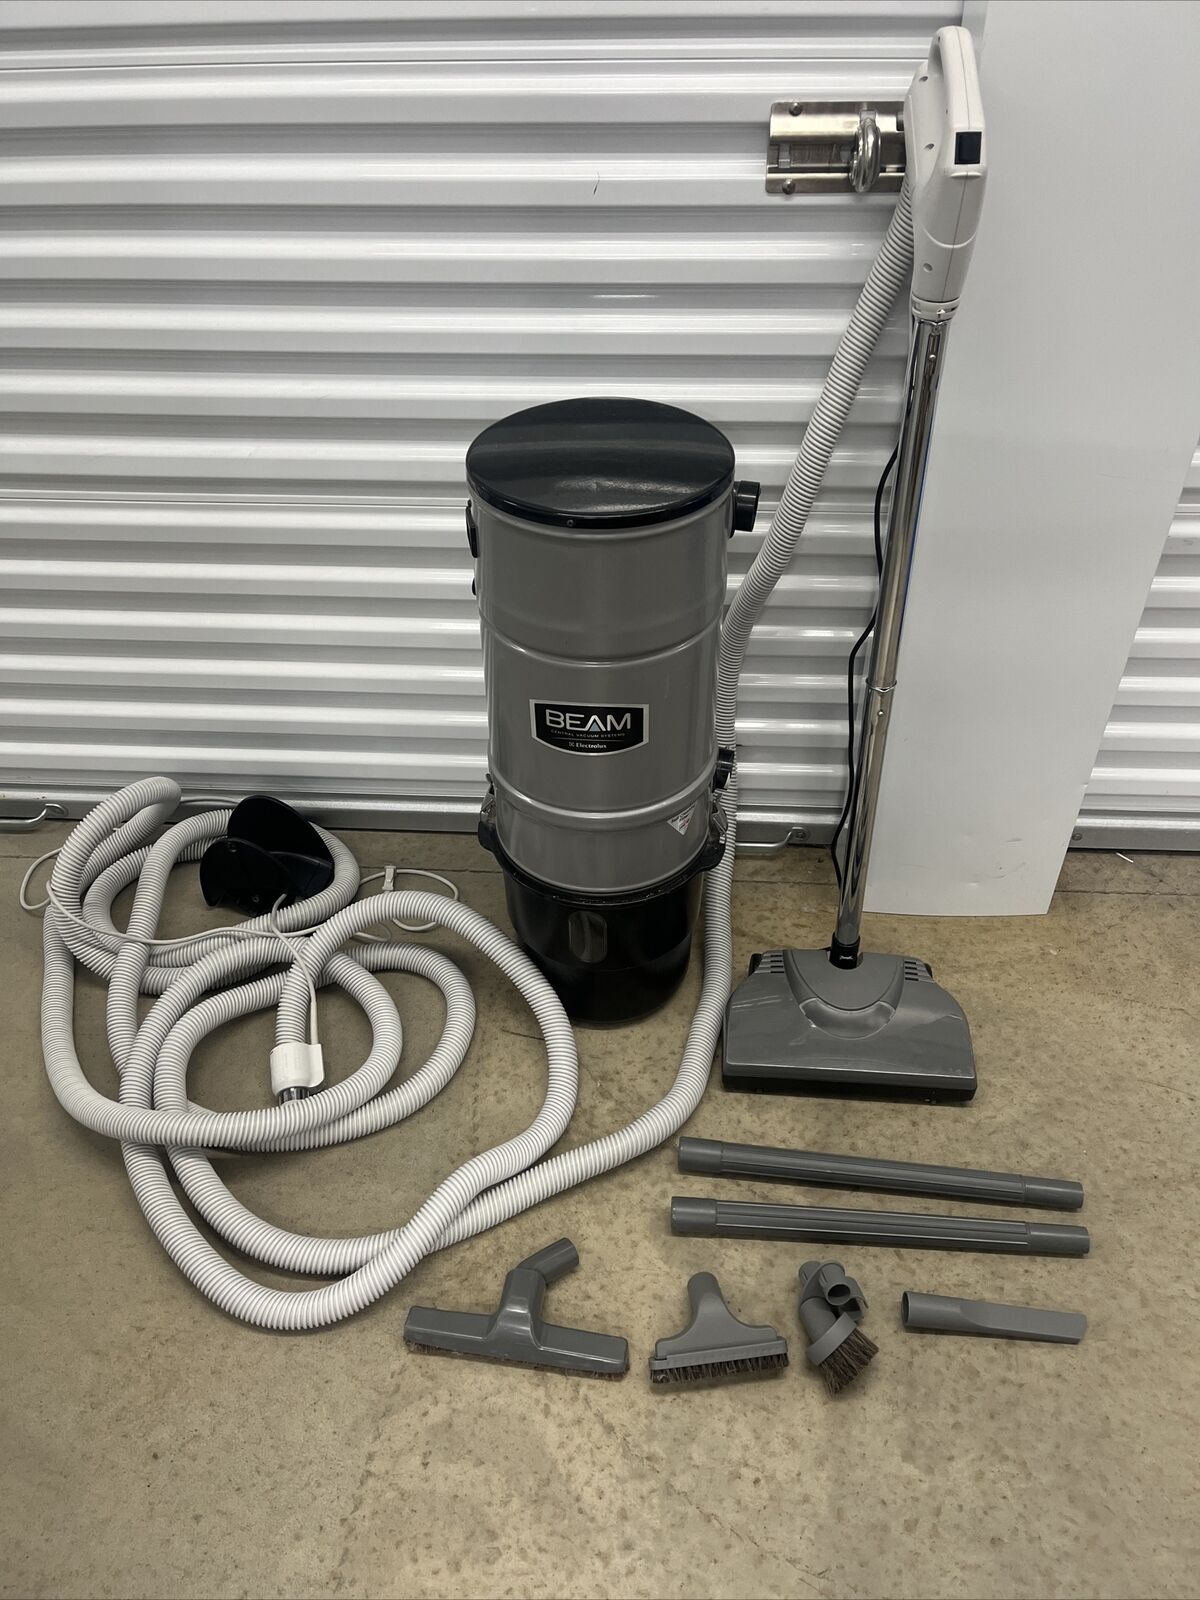 Electrolux Beam Central Vacuum System Model Sc200c Working With Attachments 